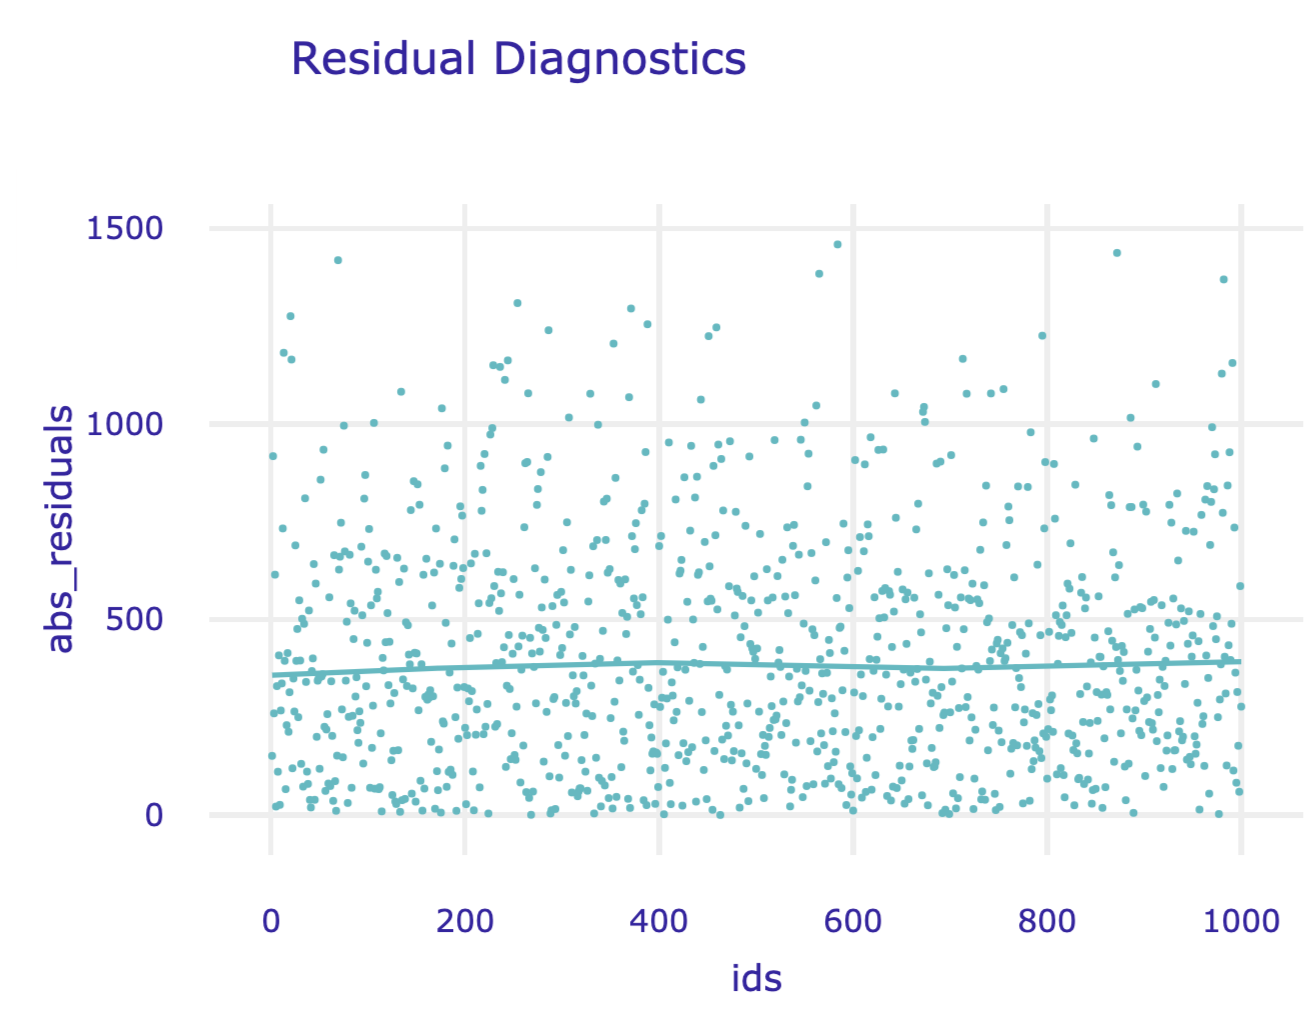 Absolute residuals versus indices of corresponding observations for the random forest model for the Apartments data.